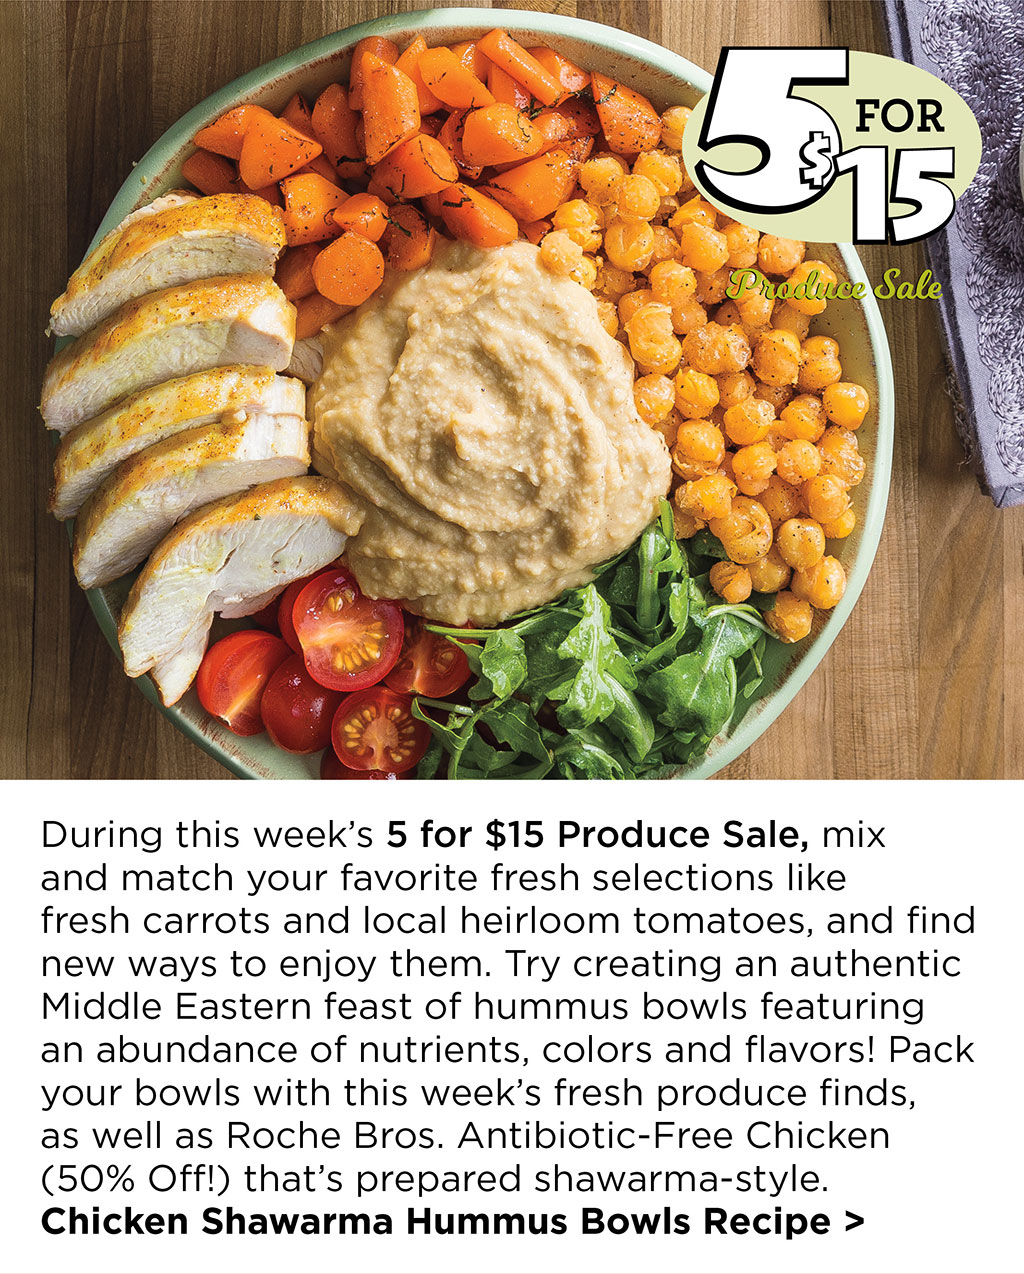 During this week's 5 for $15 Produce Sale, mix  and match your favorite fresh selections like  fresh carrots and local heirloom tomatoes, and find new ways to enjoy them. Try creating an authentic Middle Eastern feast of hummus bowls featuring an abundance of nutrients, colors and flavors! Pack your bowls with this week's fresh produce finds,  as well as Roche Bros. Antibiotic-Free Chicken (50% Off!) that's prepared shawarma-style. Chicken Shawarma Hummus Bowls Recipe >